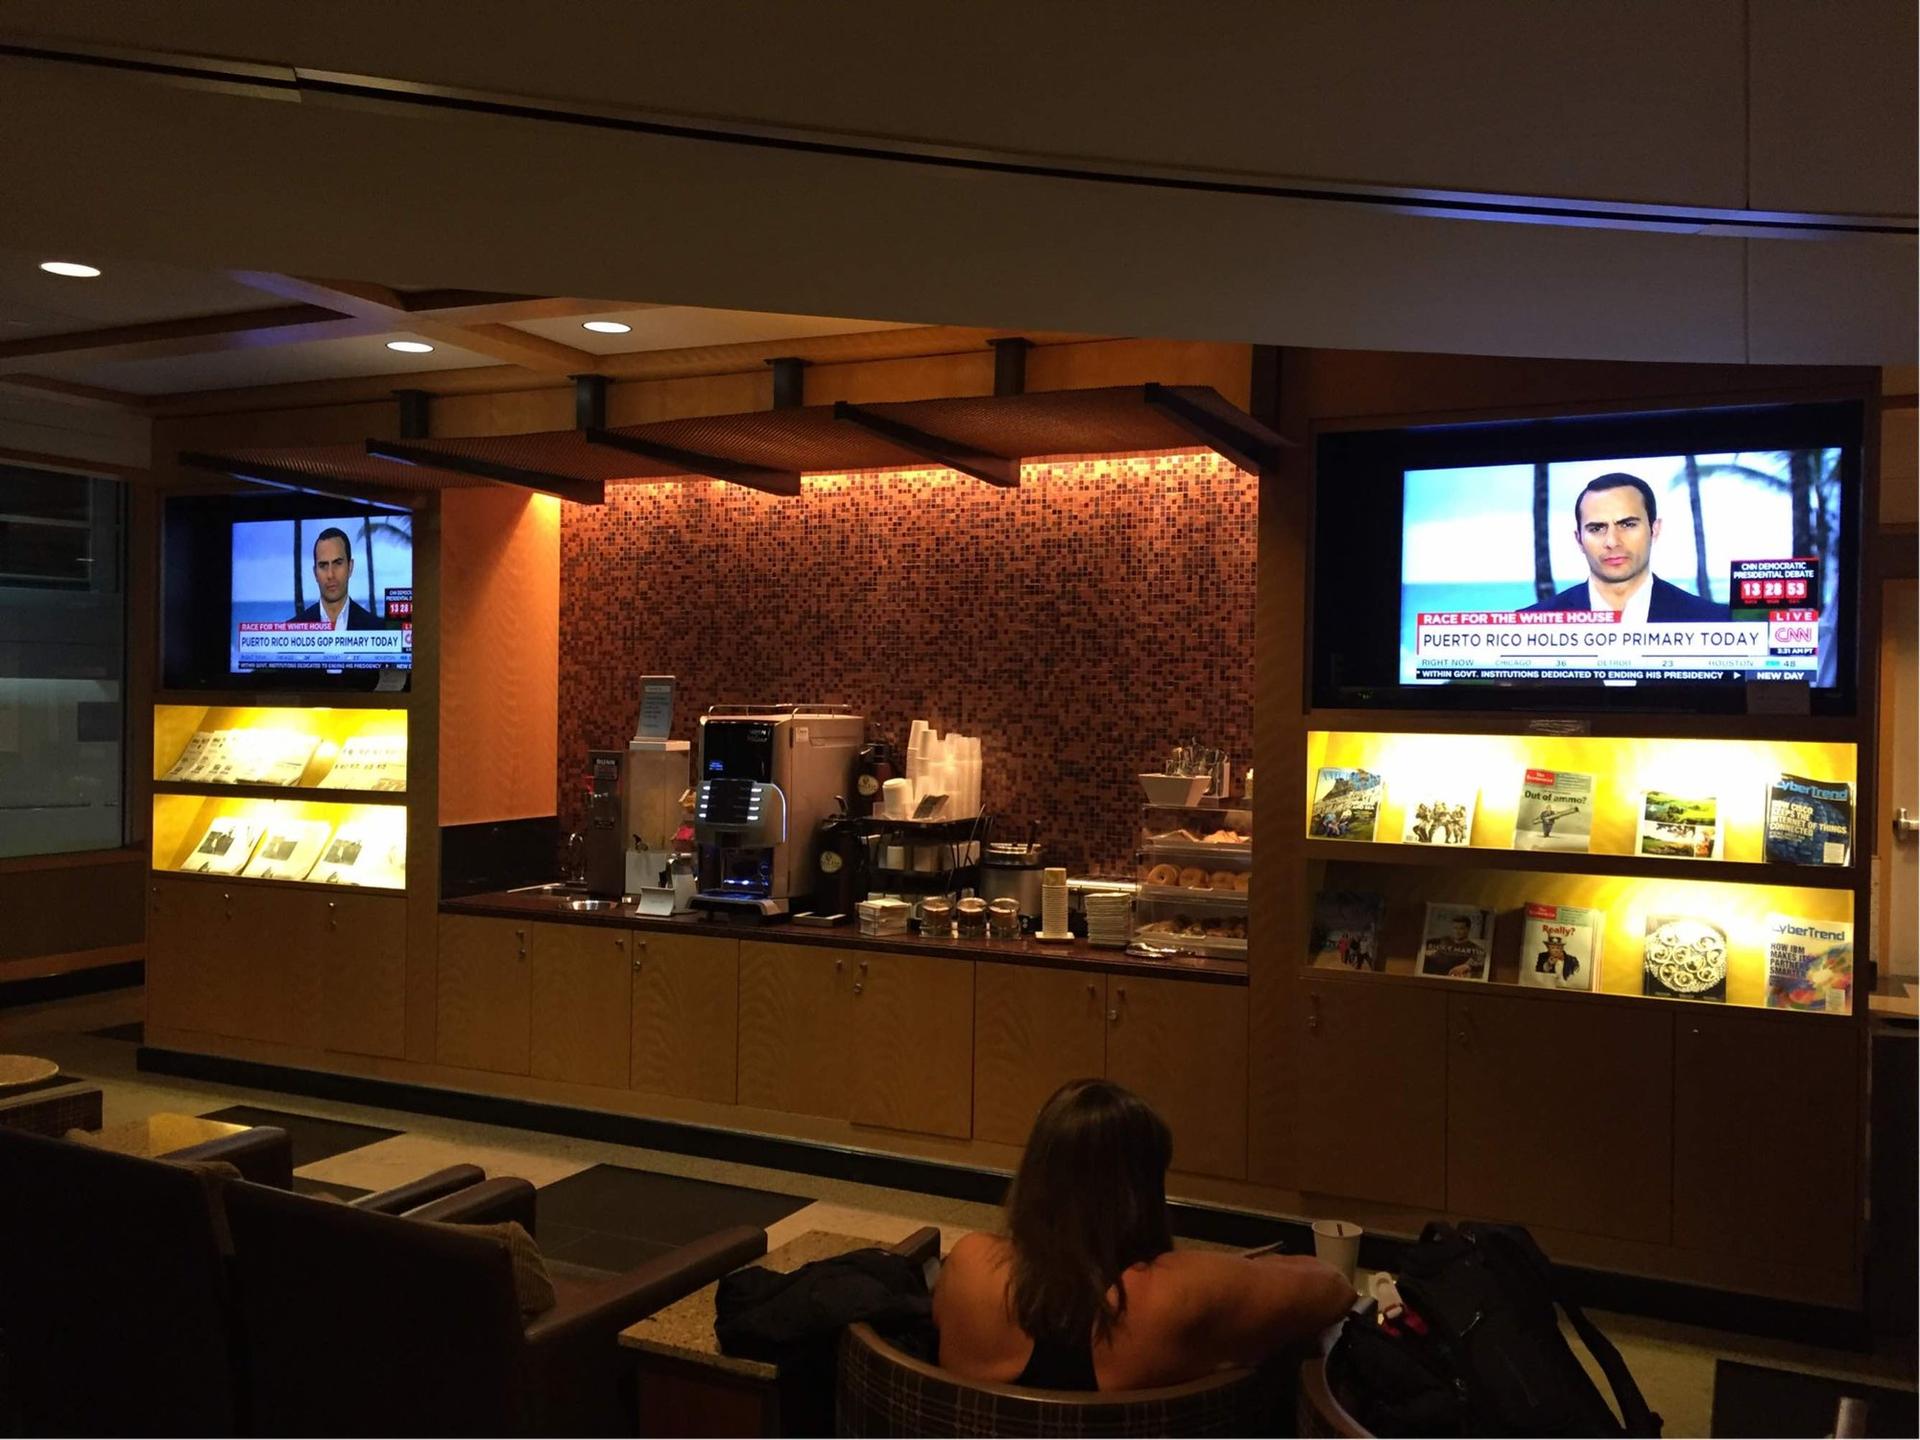 American Airlines Admirals Club image 3 of 14